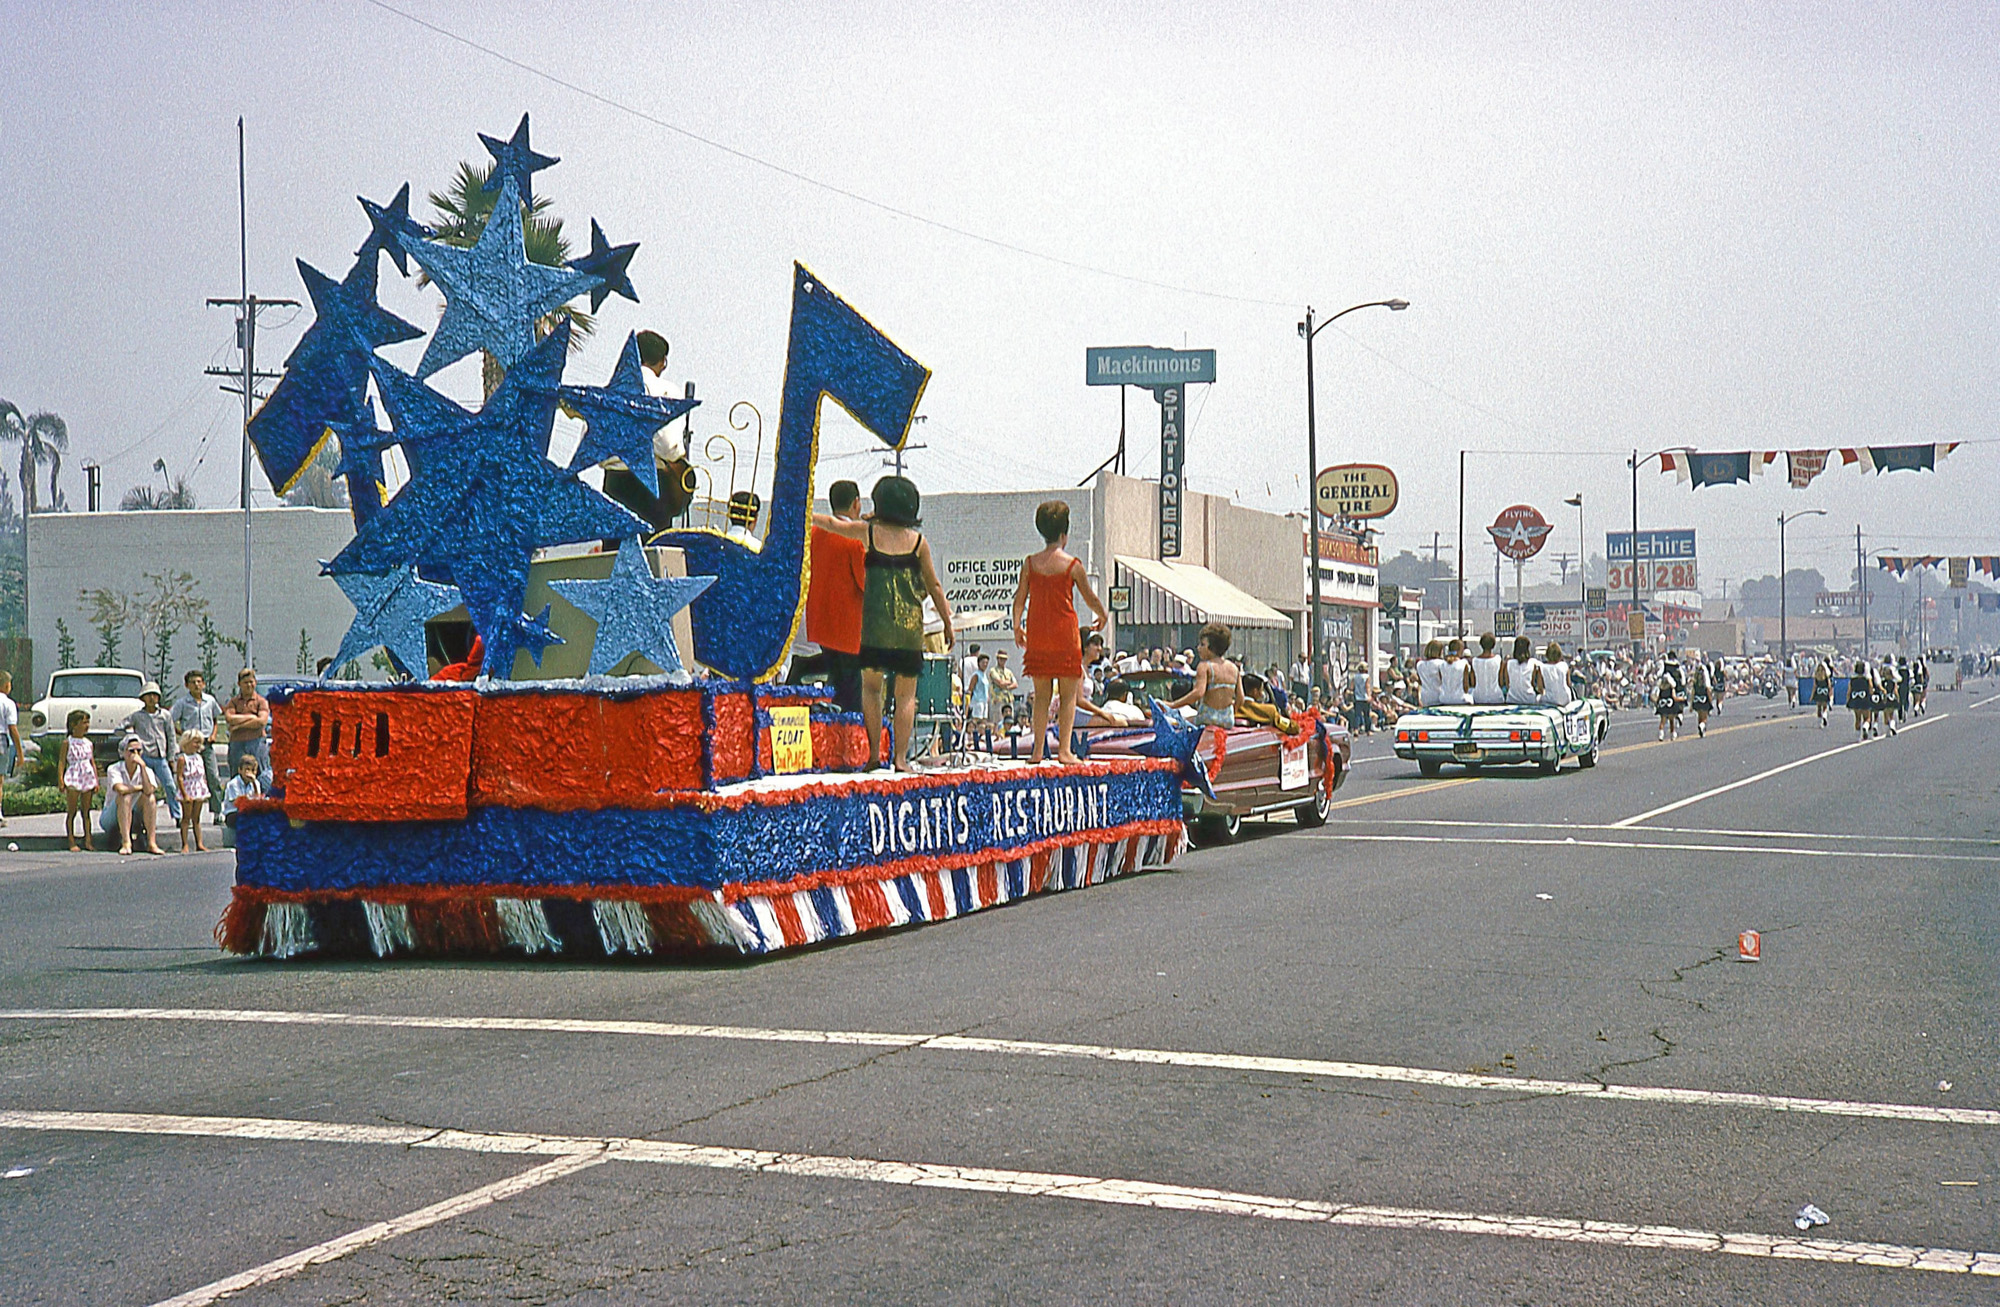 Wilshire gas 28-9/10¢ a gallon, Blue Chip Stamps, Green Stamps, go-go girls on a float, what more could you ask for? Taken by my dad in La Habra, California, August, 1965. View full size.